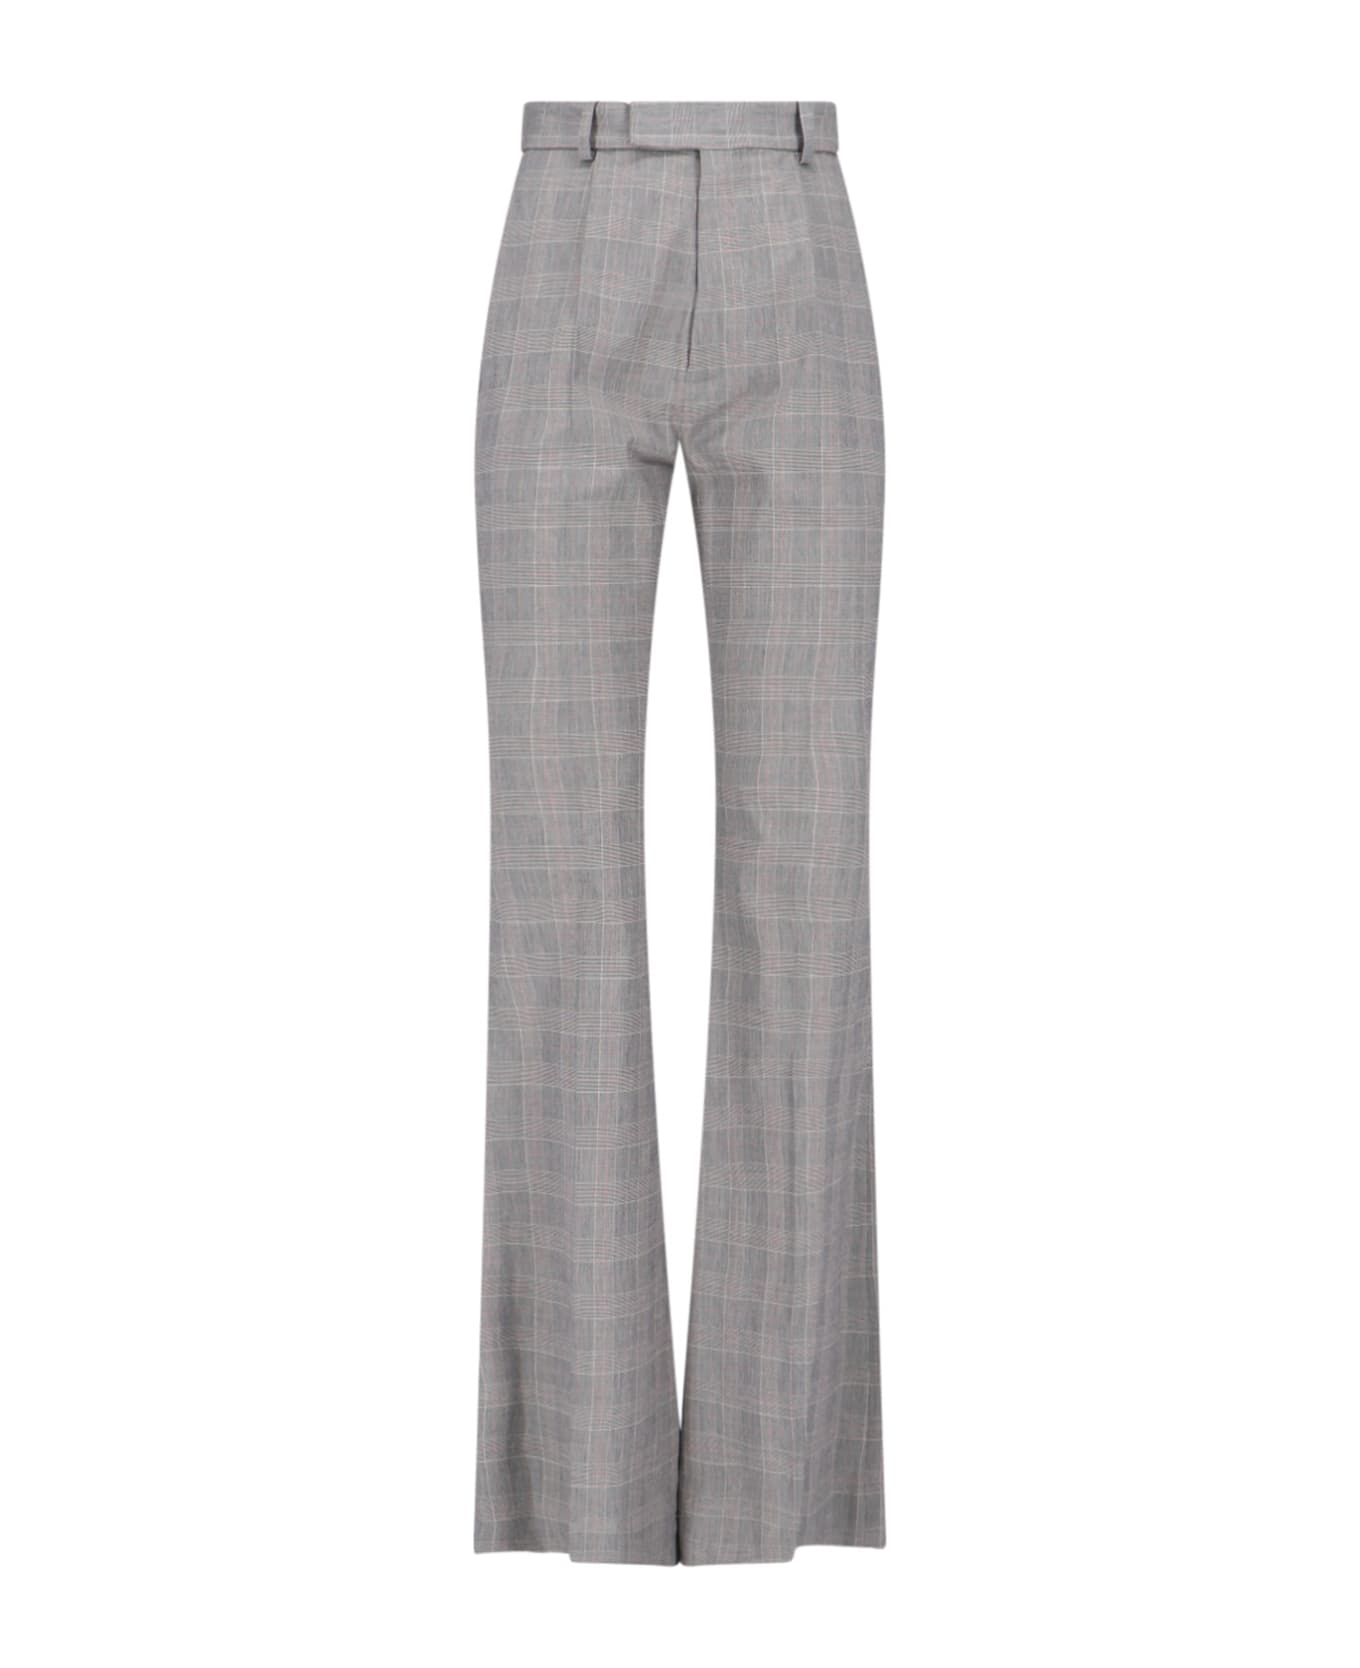 Vivienne Westwood 'ray' Bootcut Trousers - Gray